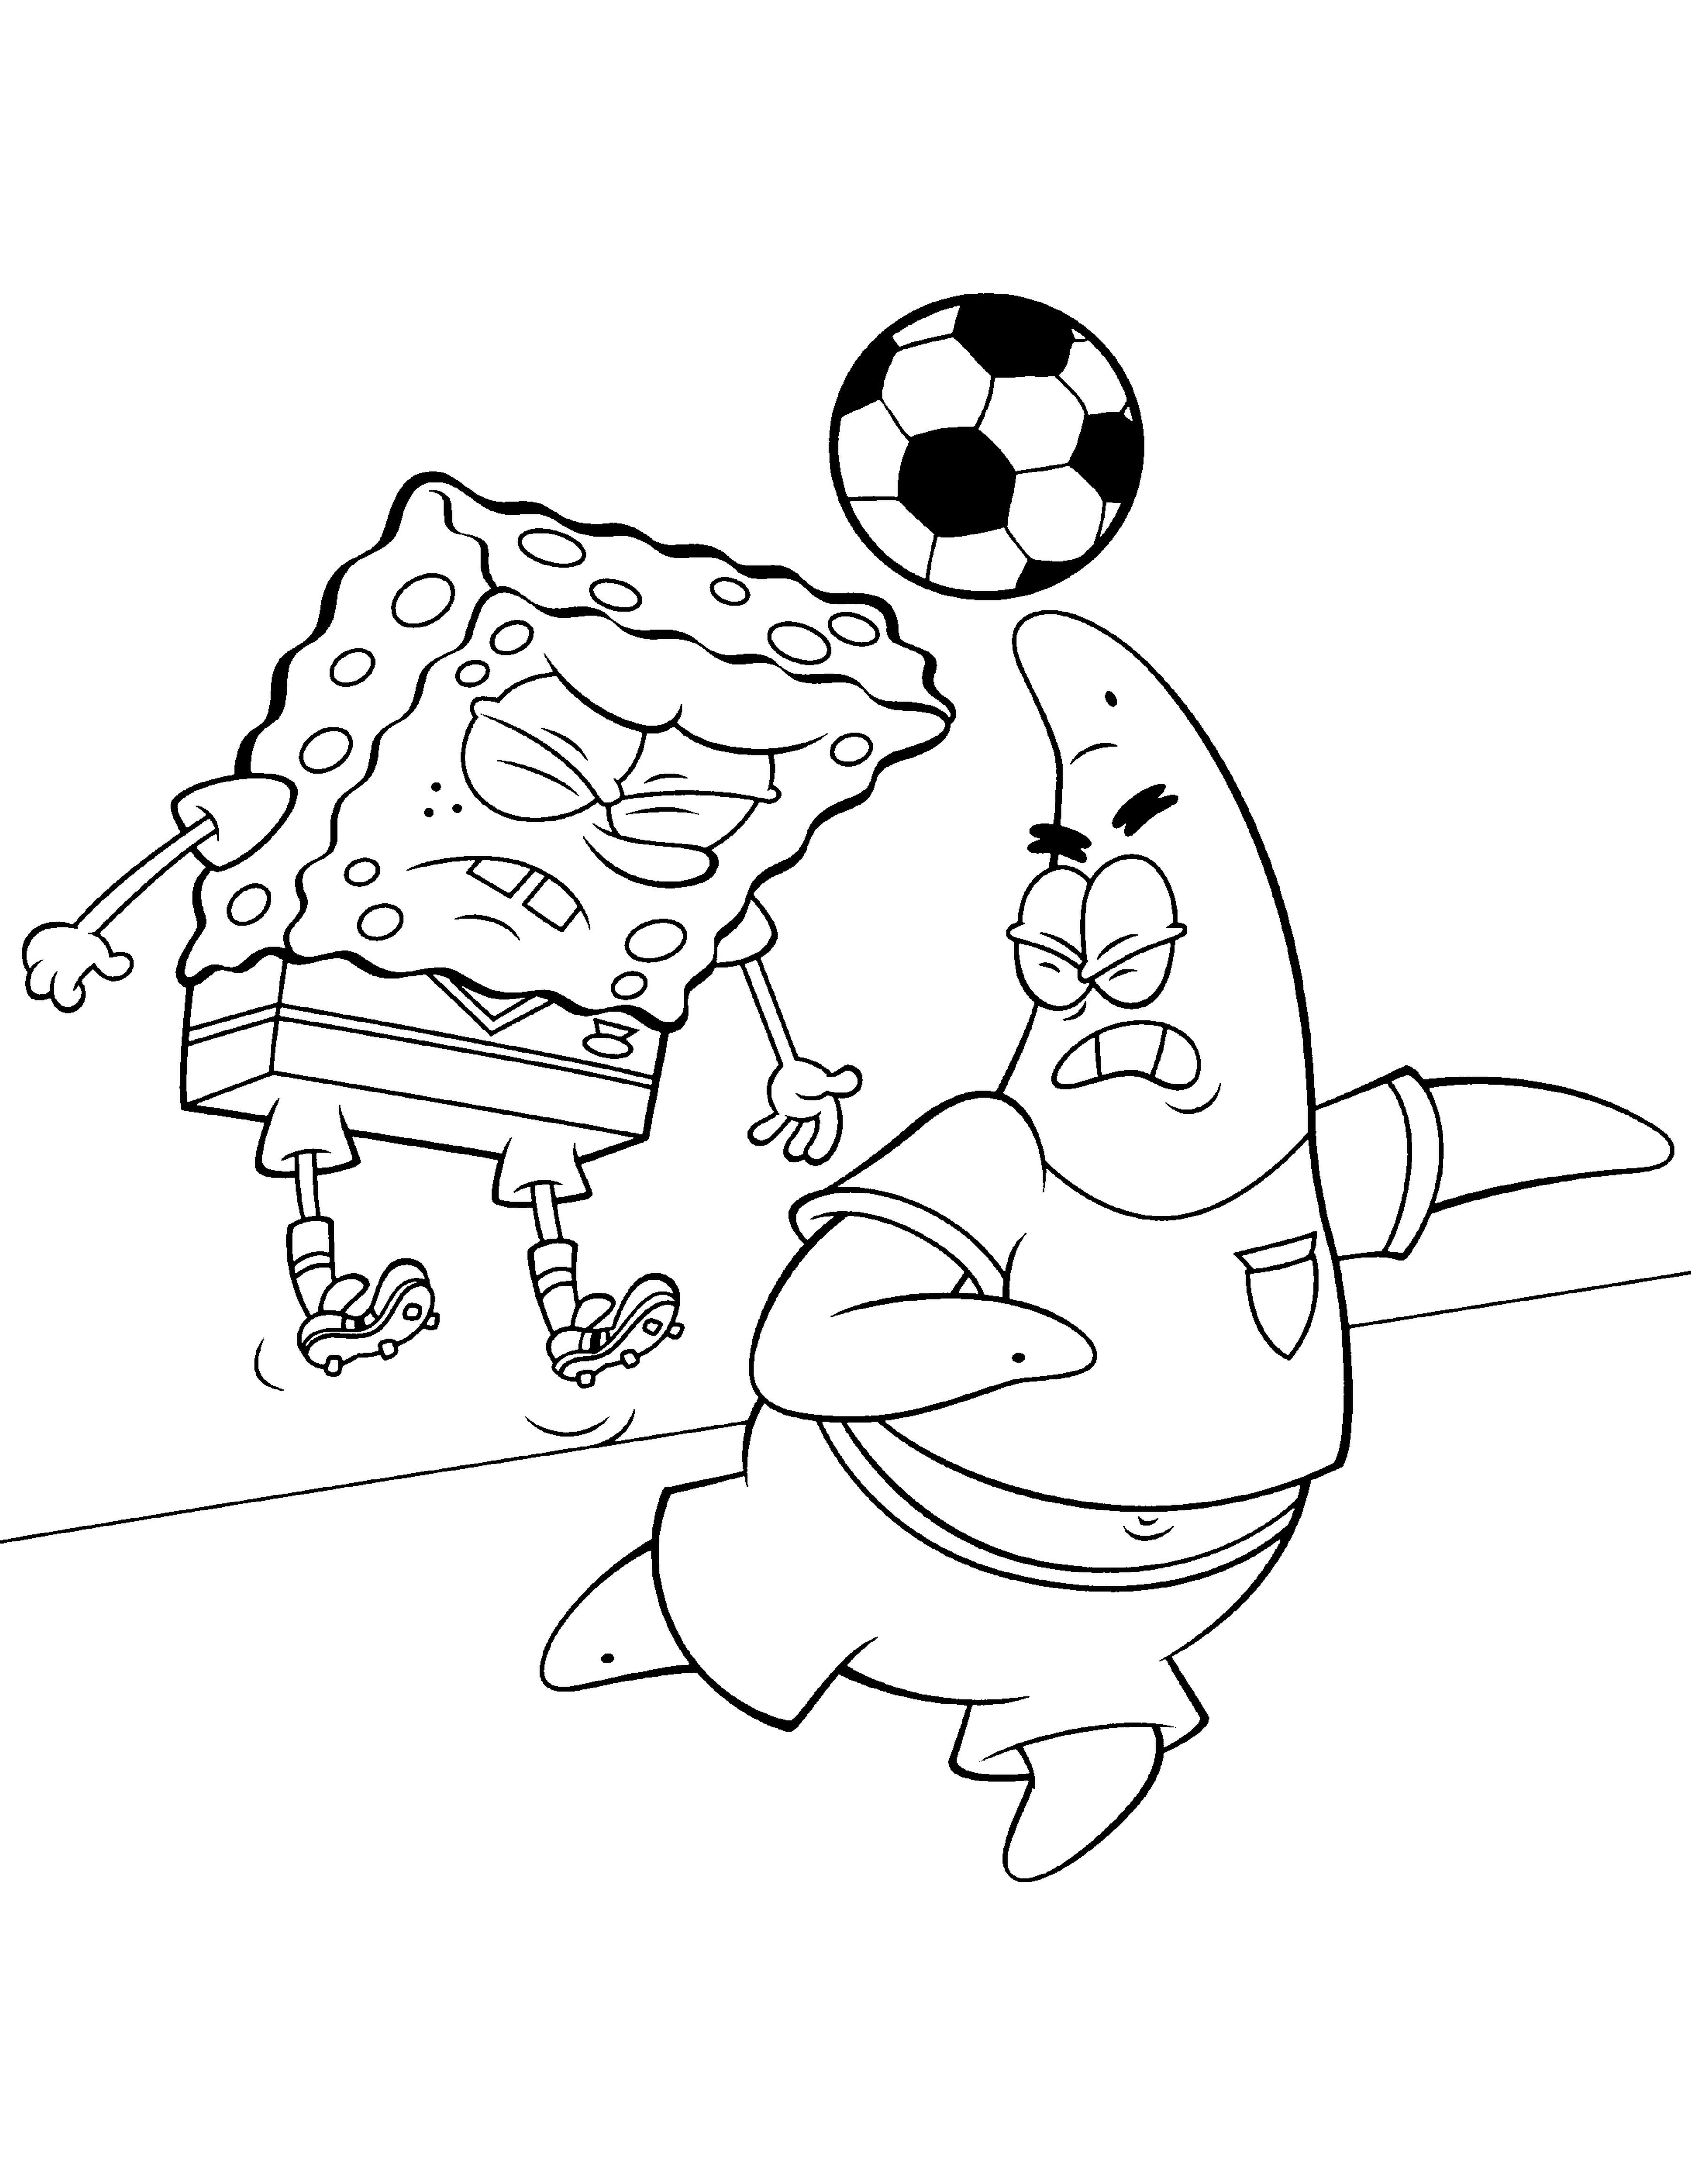 Free Sport coloring pages to print for kids Download print and color